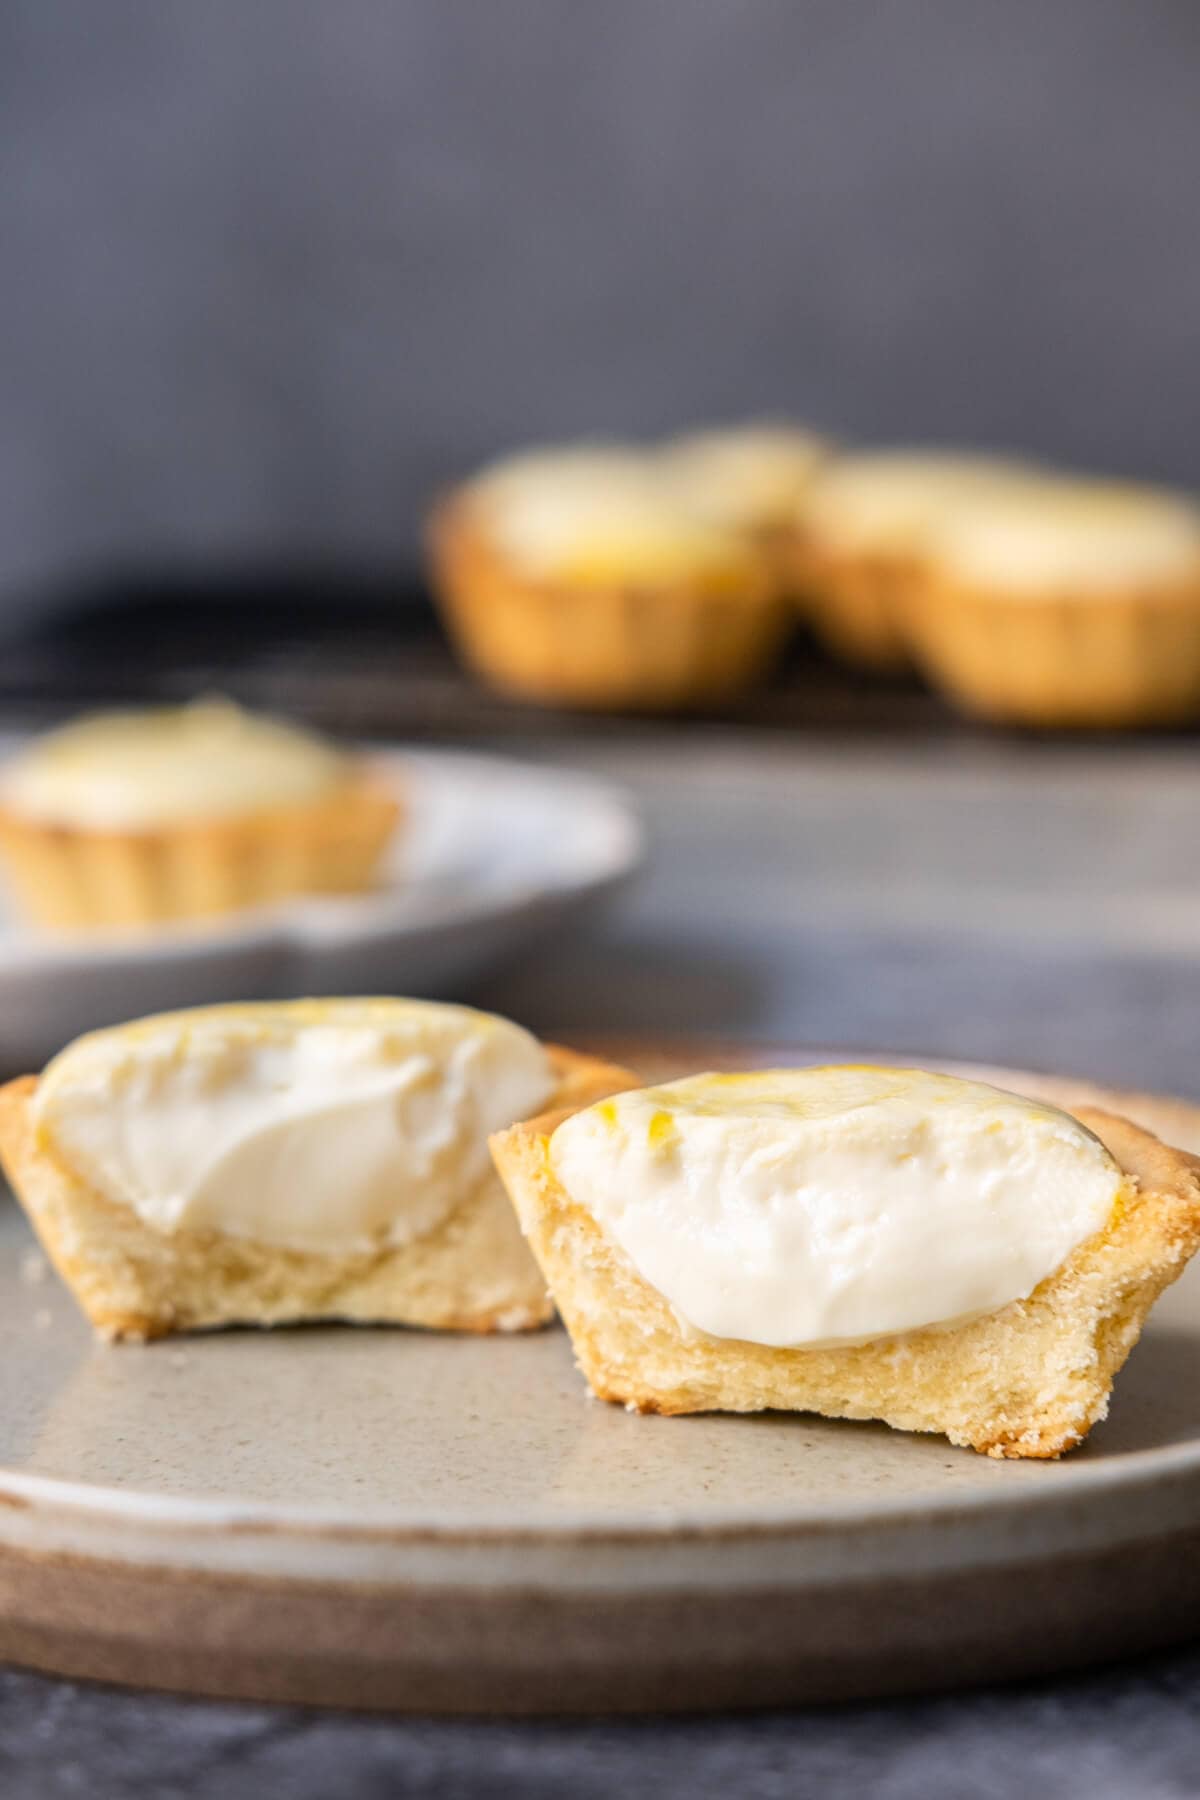 Hokkaido cheese tarts cut open half, featuring a beautifully golden-brown crust and a rich cheese filling.